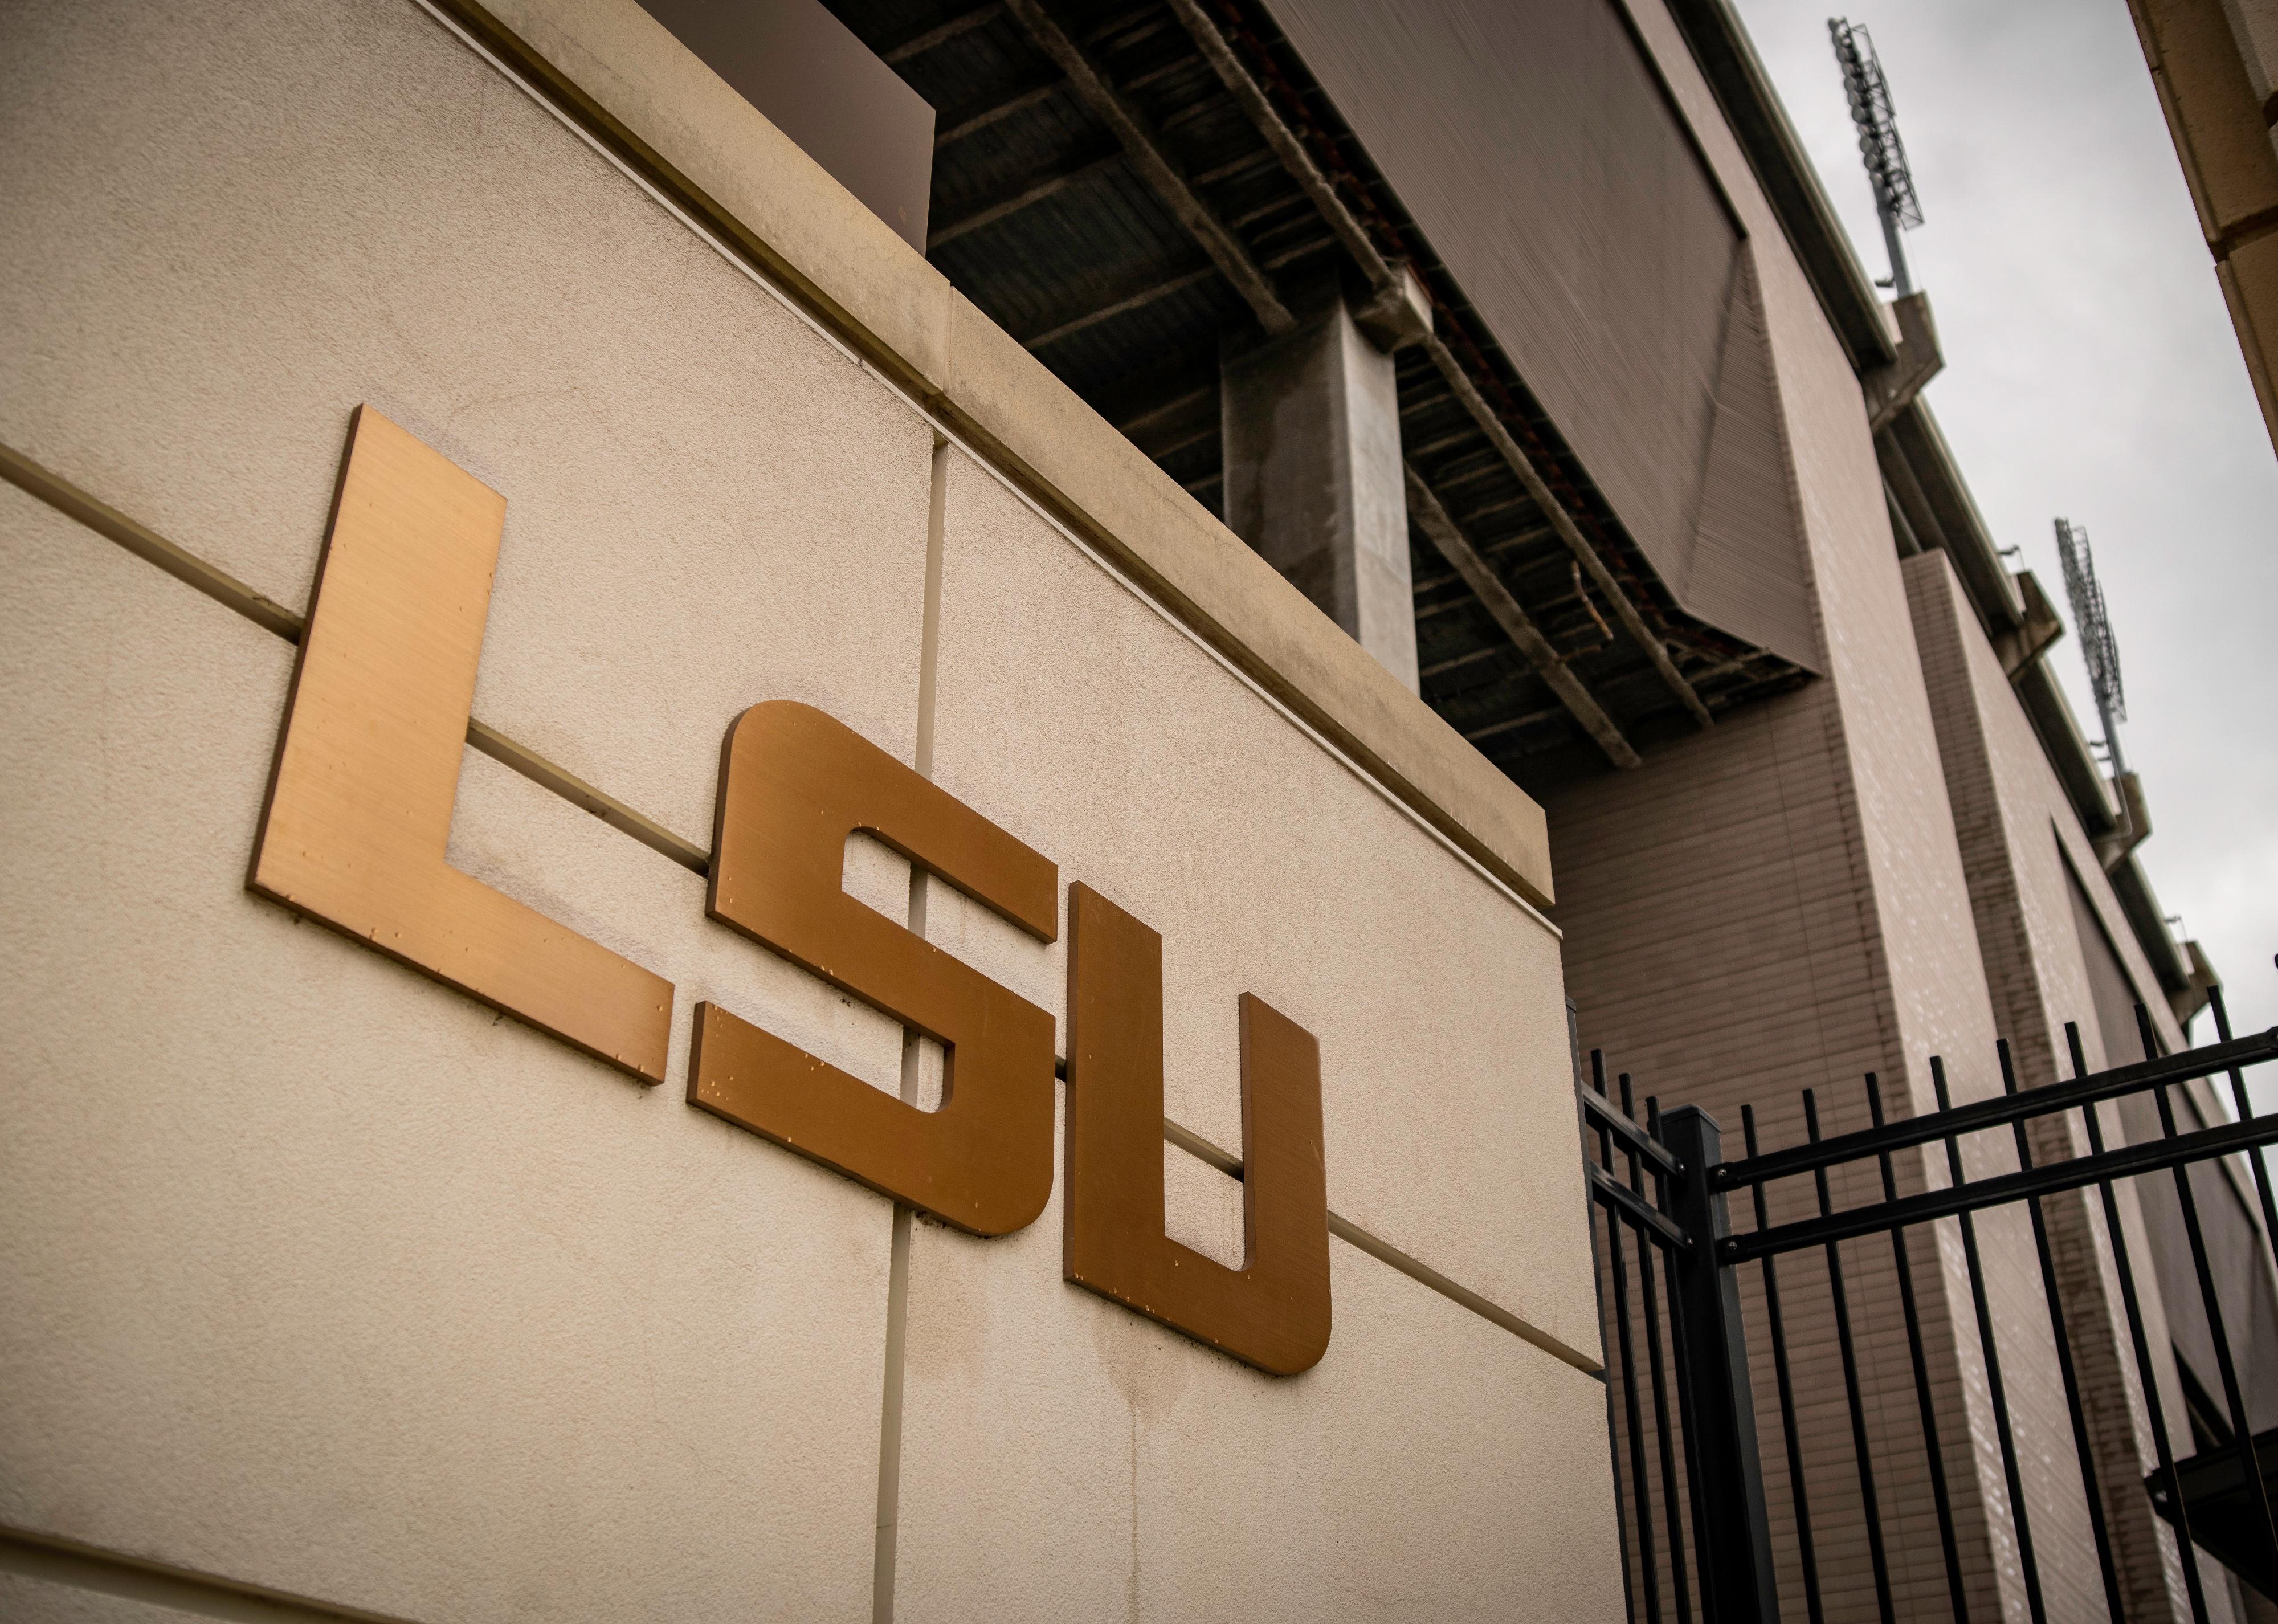 LSU (Louisiana State University) golden letters on a sign.